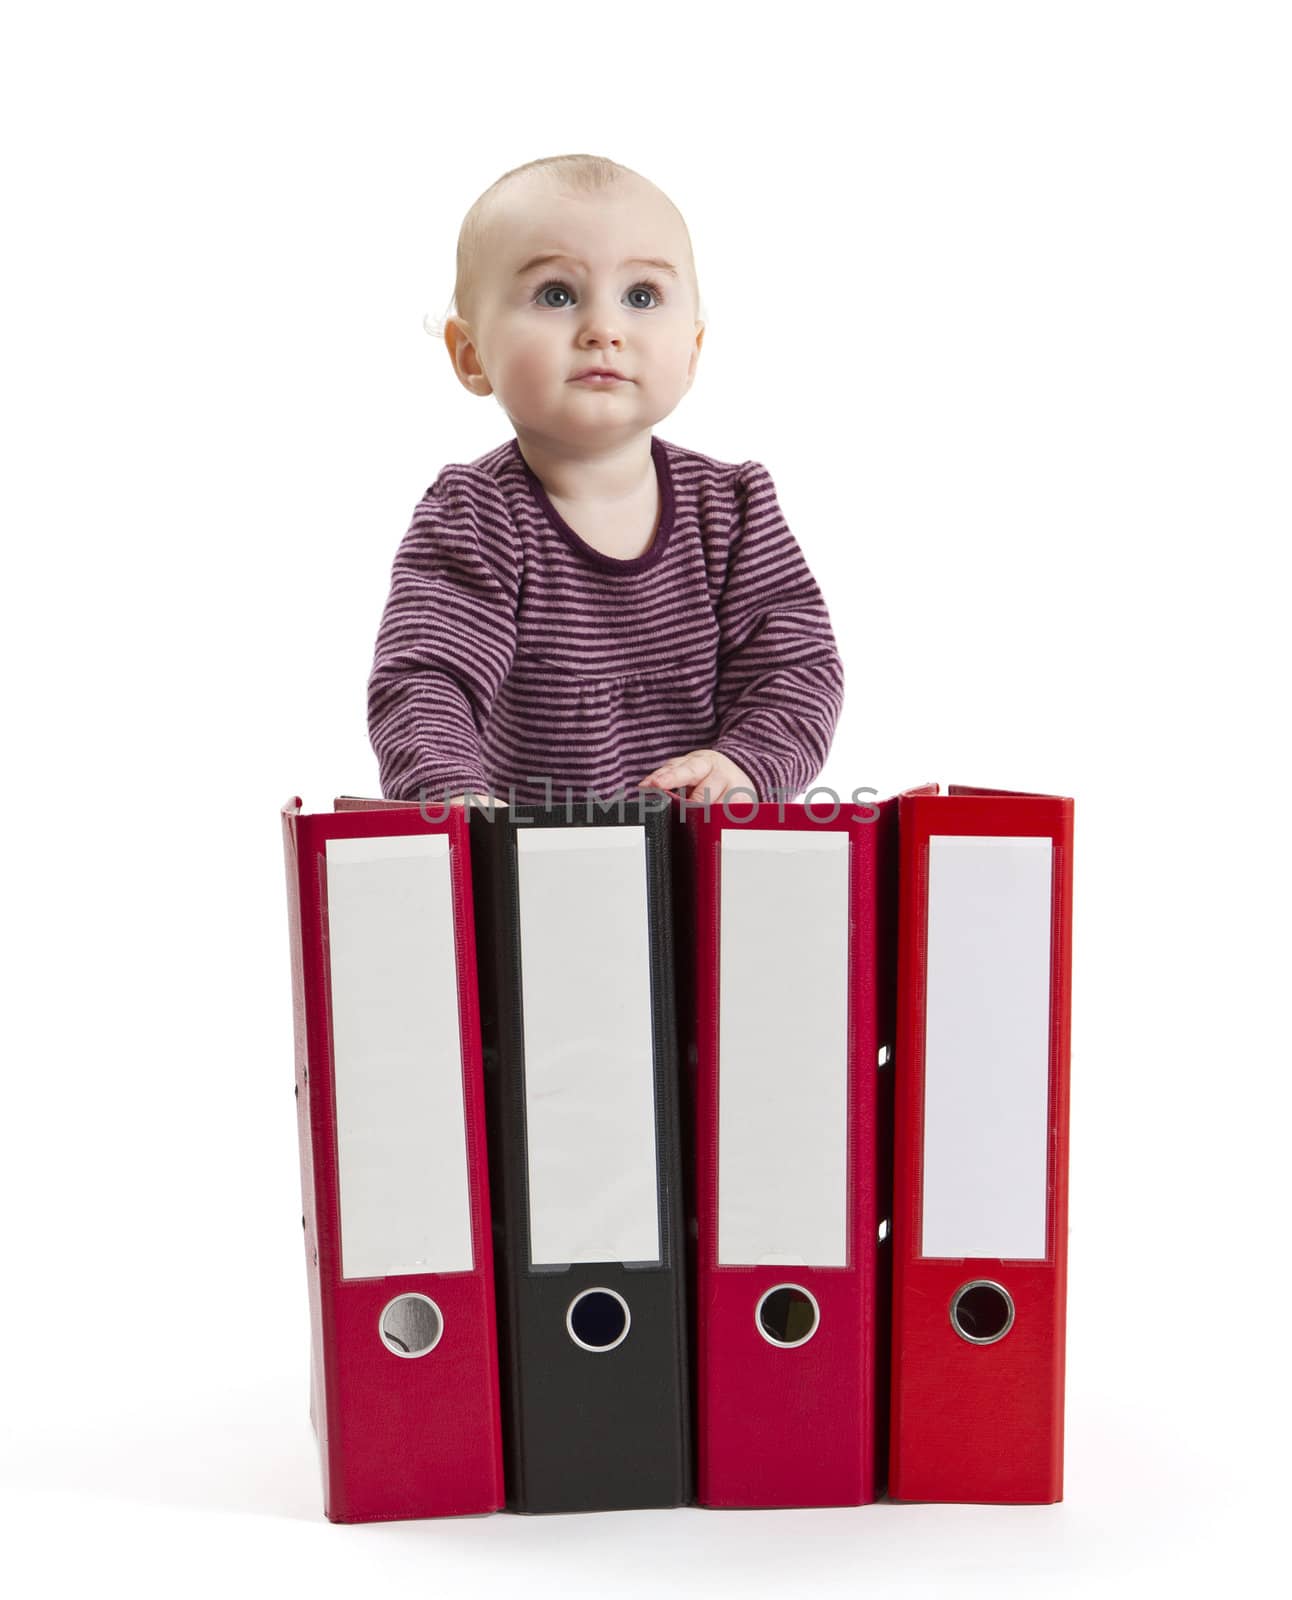 young child in light background with four ring files